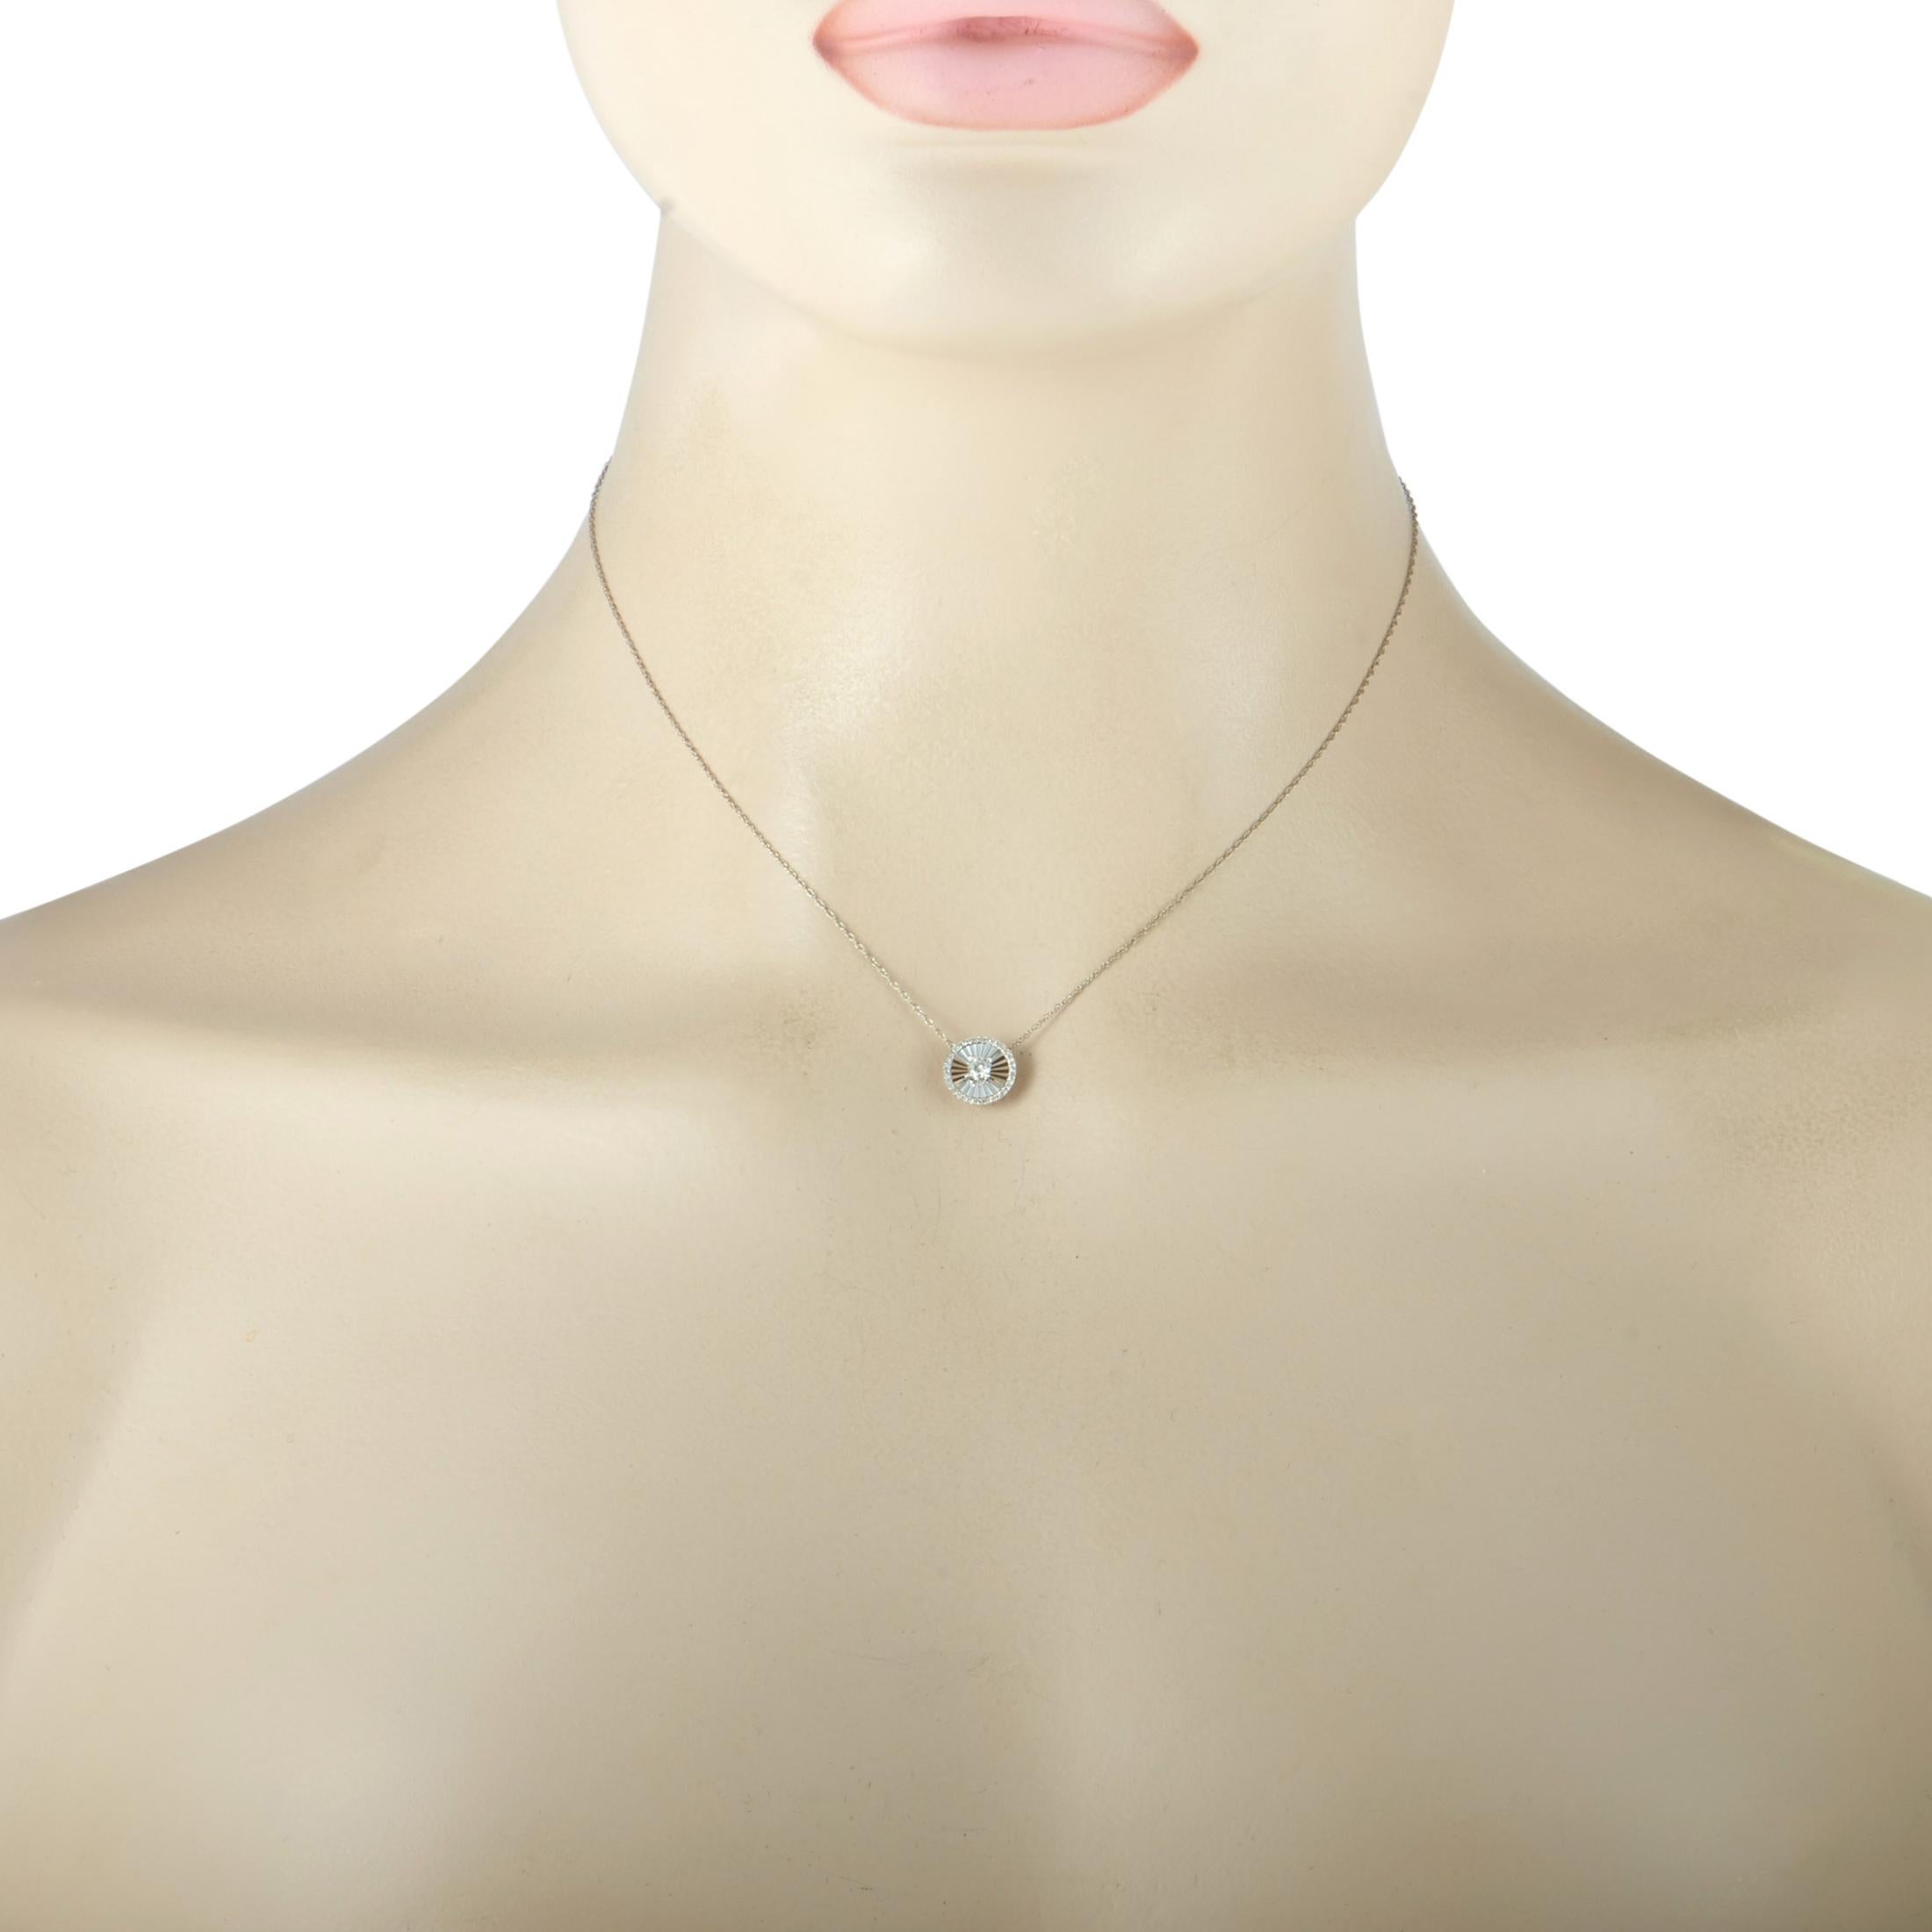 This necklace is made out of 14K white gold and diamonds that amount to 0.25 carats. The necklace weighs 2 grams and is presented with a 14” chain, onto which a 0.37” by 0.37” pendant is attached.
 
 Offered in brand new condition, this item